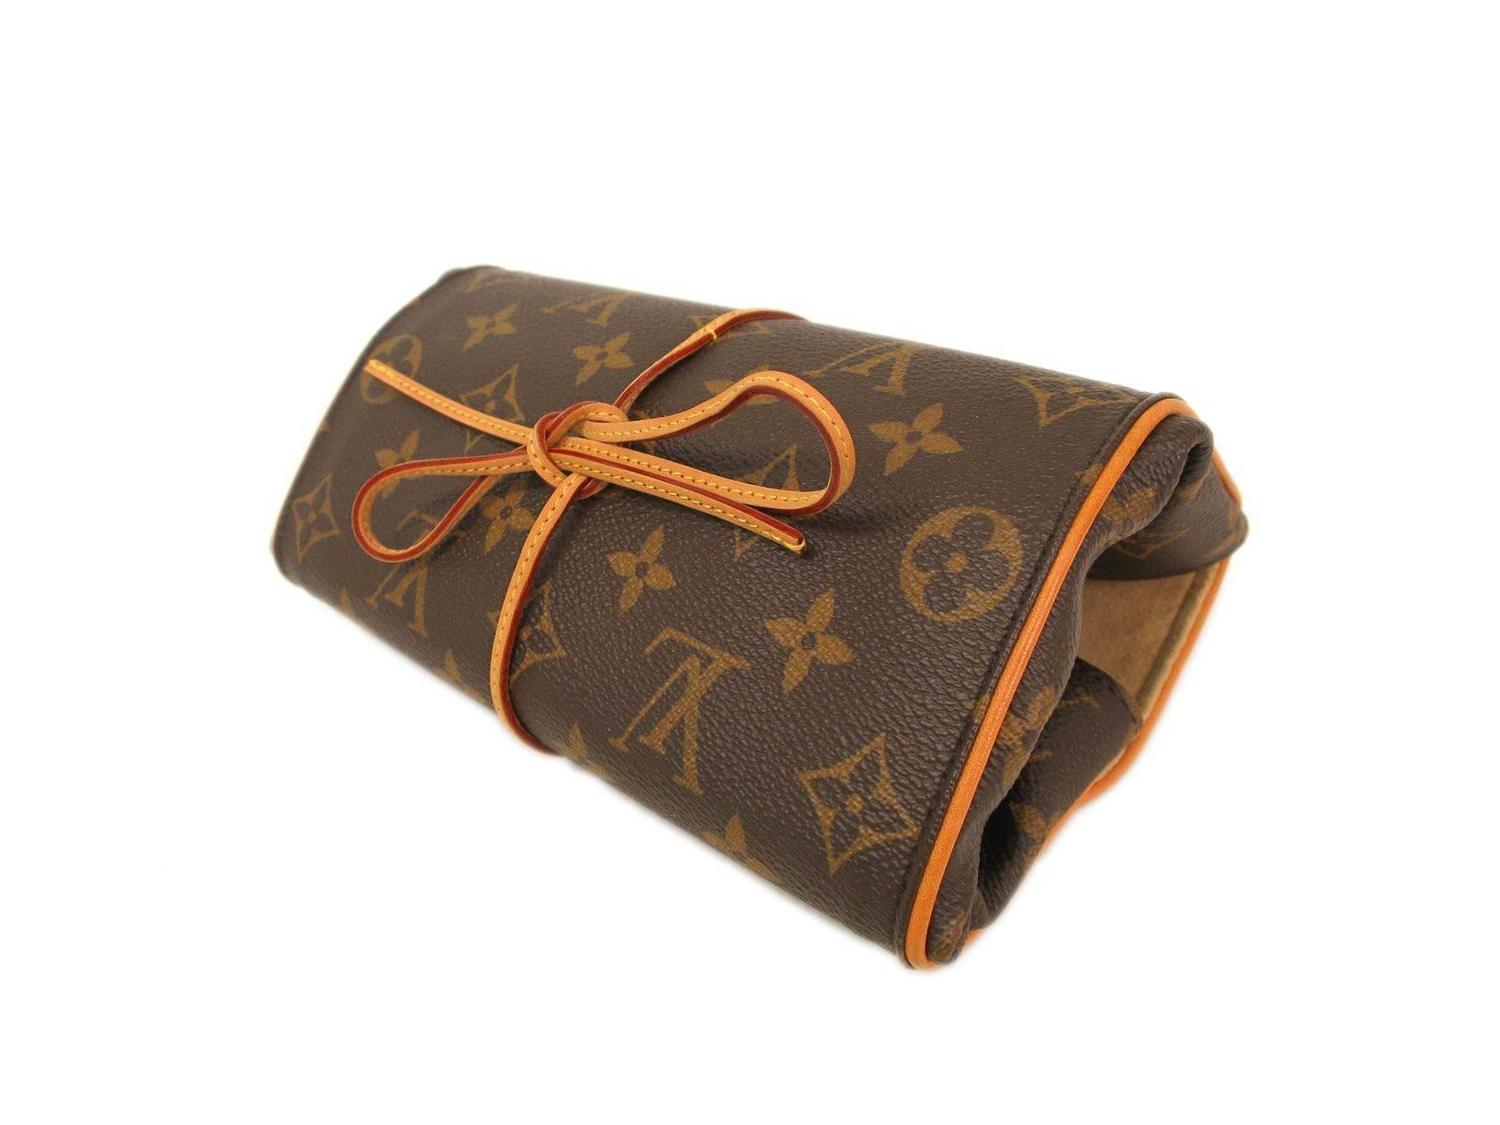 Louis Vuitton Monogram Canvas Jewelry Roll Accessory Travel Case For Sale at 1stdibs